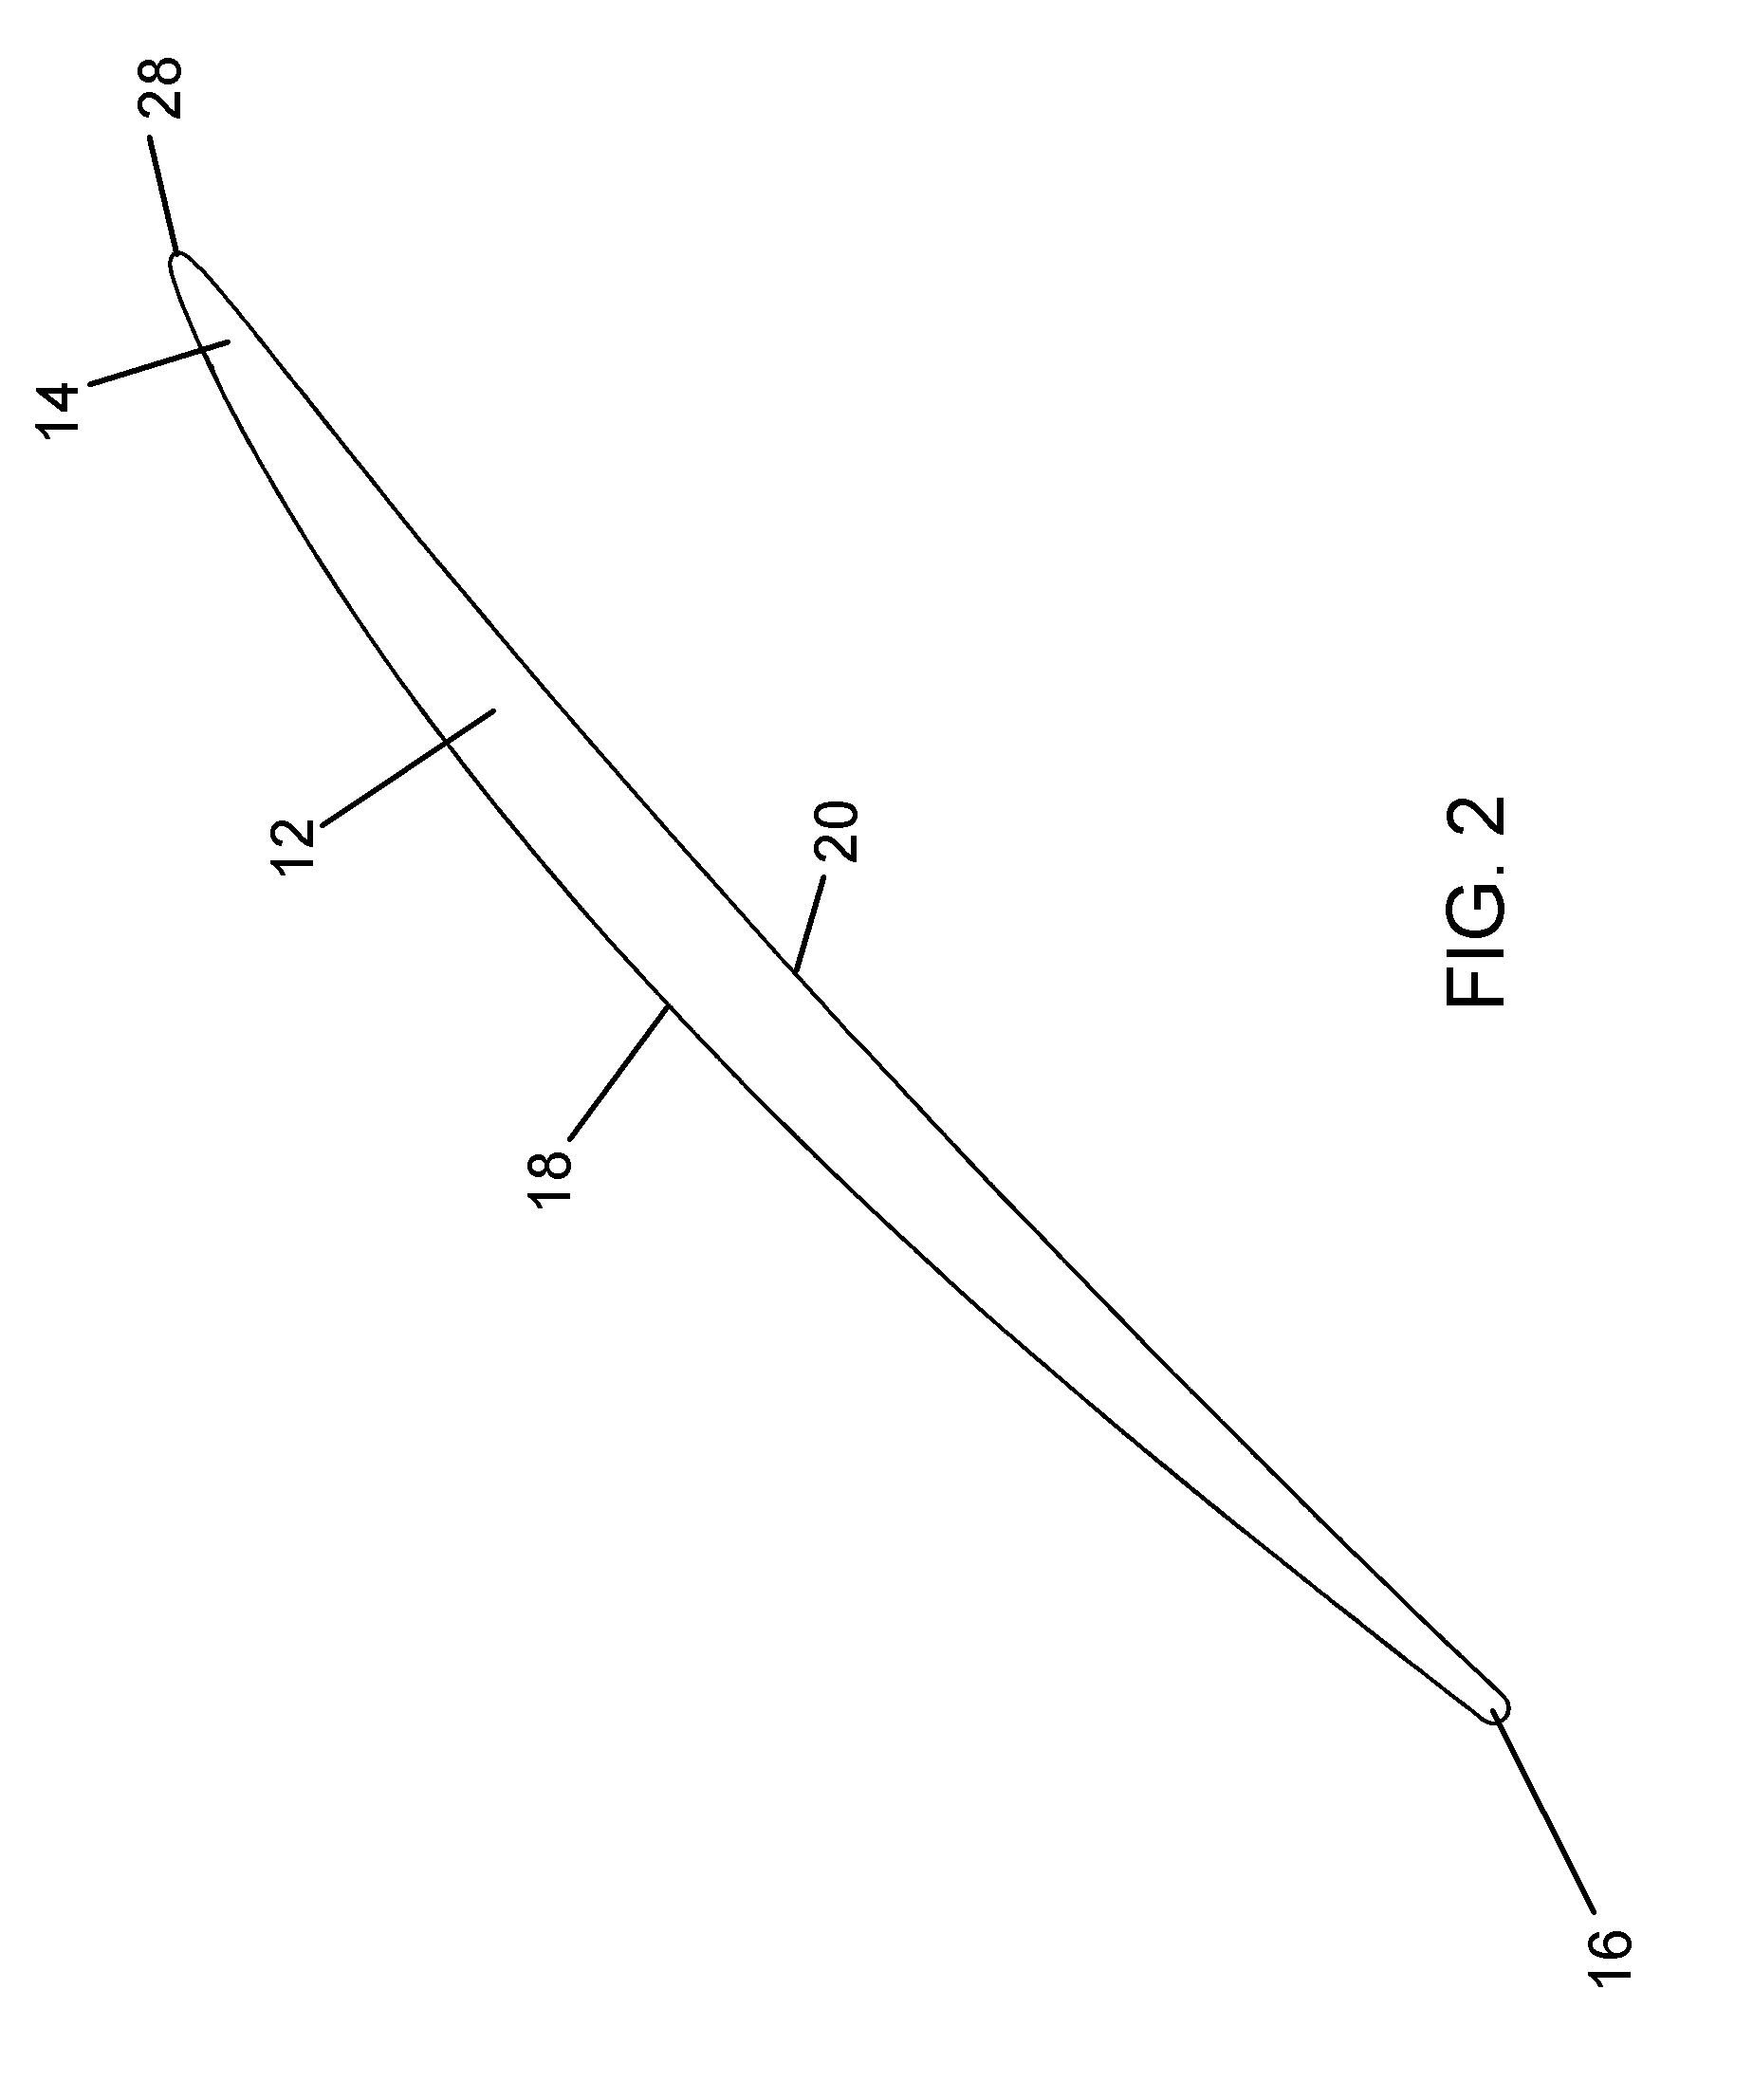 Airfoil and process for depositing an erosion-resistant coating on the airfoil